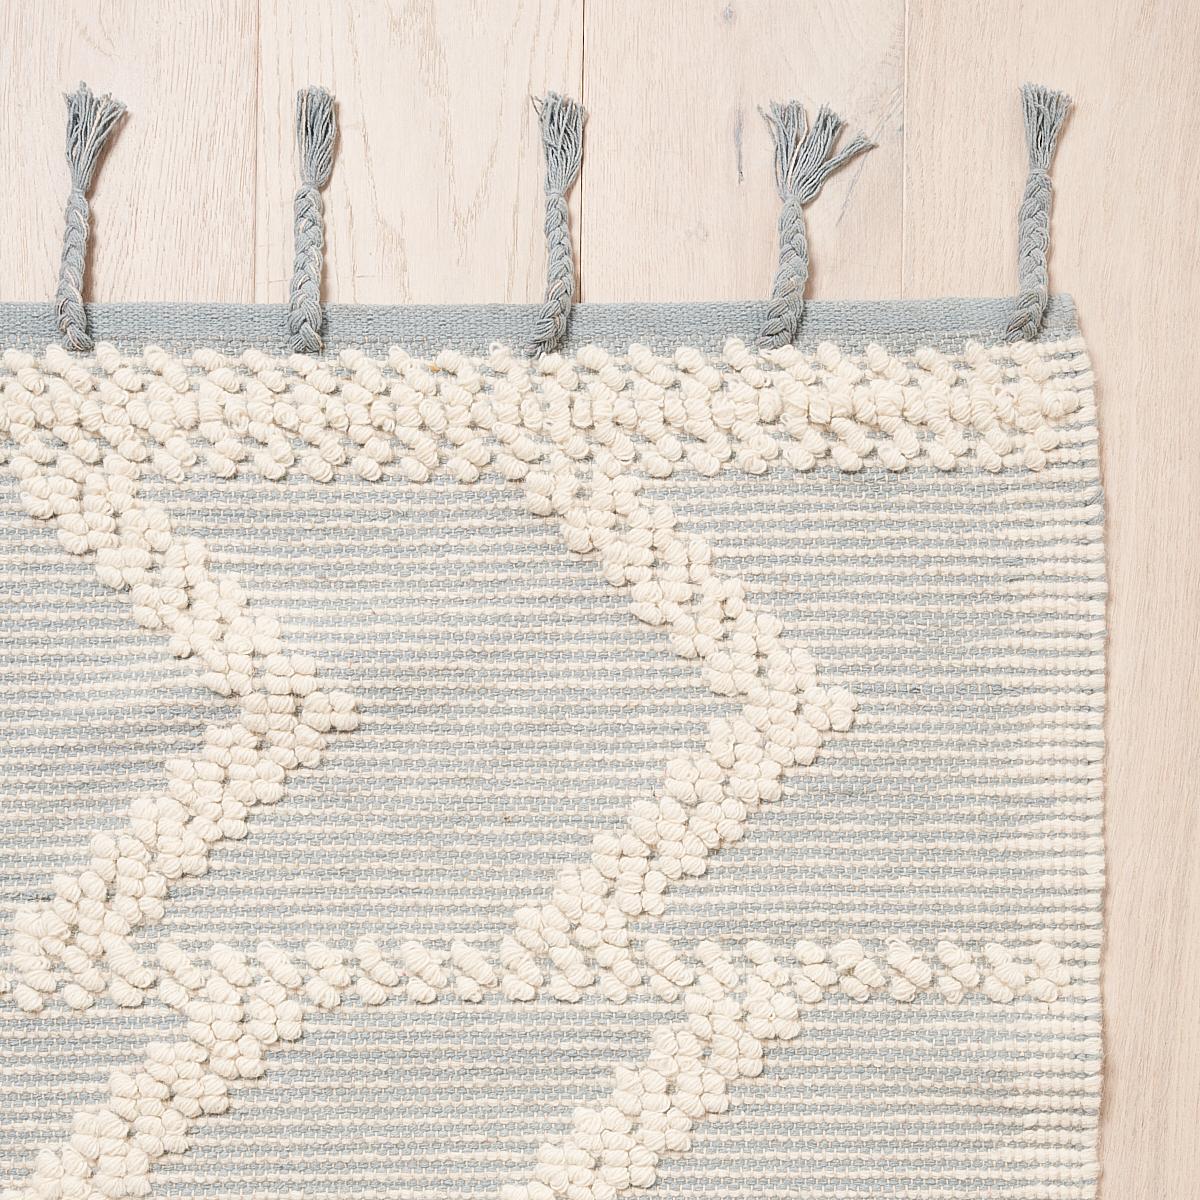 This rug will ship in December. Made of wool and cotton on a traditional pit loom, Malta French Knot is a dynamic stripe with lovely dimension and texture accentuated by tassel fringe. This versatile geometric design has a casual look that works